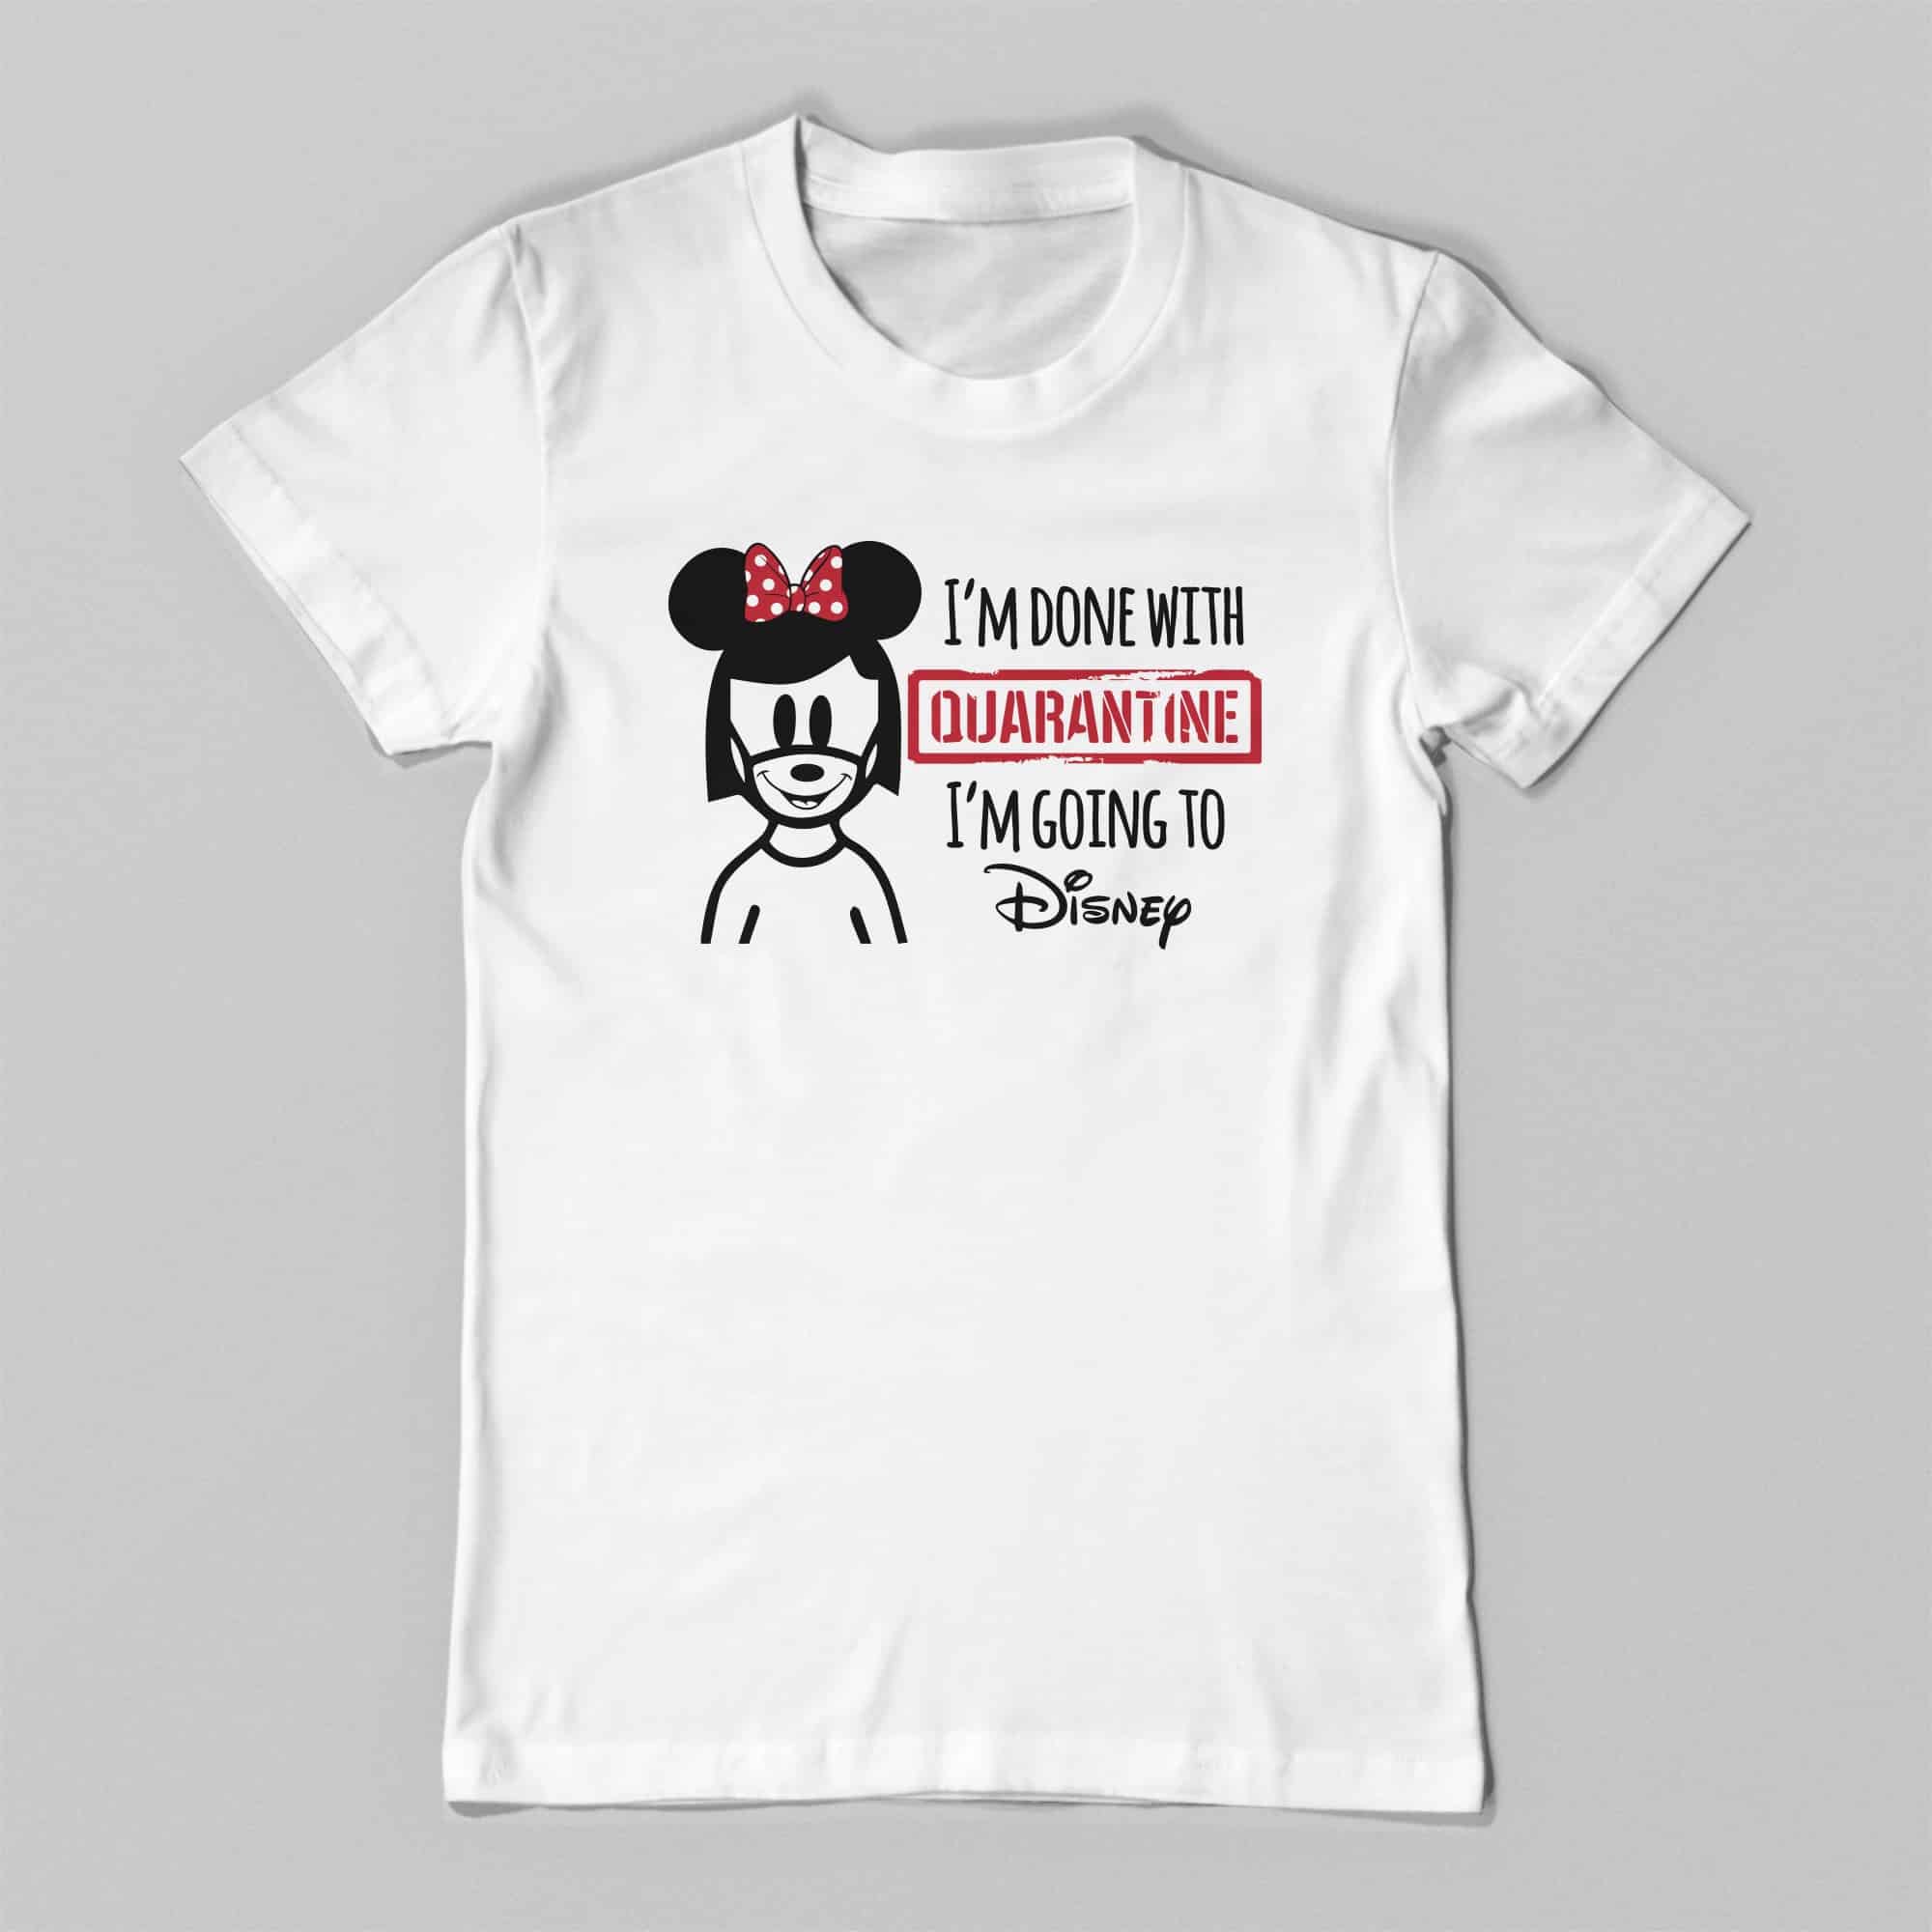 I'm Done With Quarntiene, I'm Going to DISNEY Tee Shirt